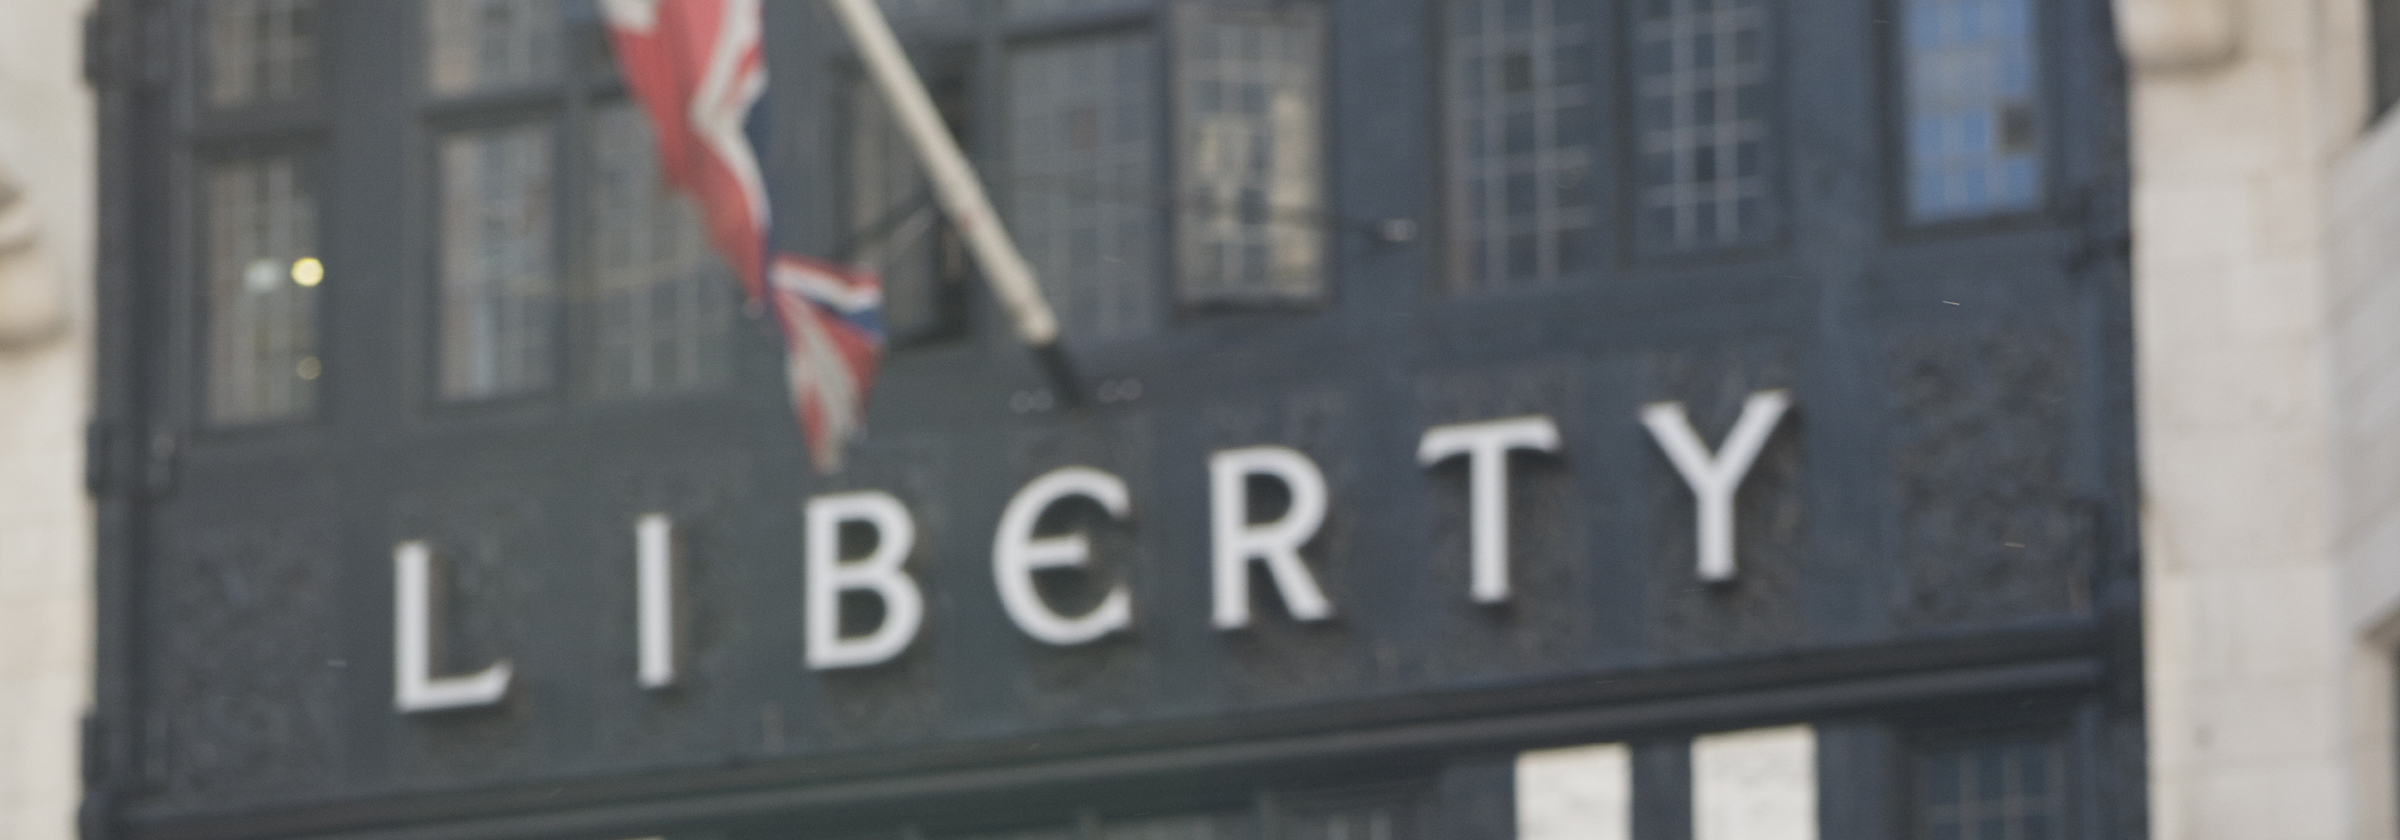 Liberty London department store works with Visual Merchandising students